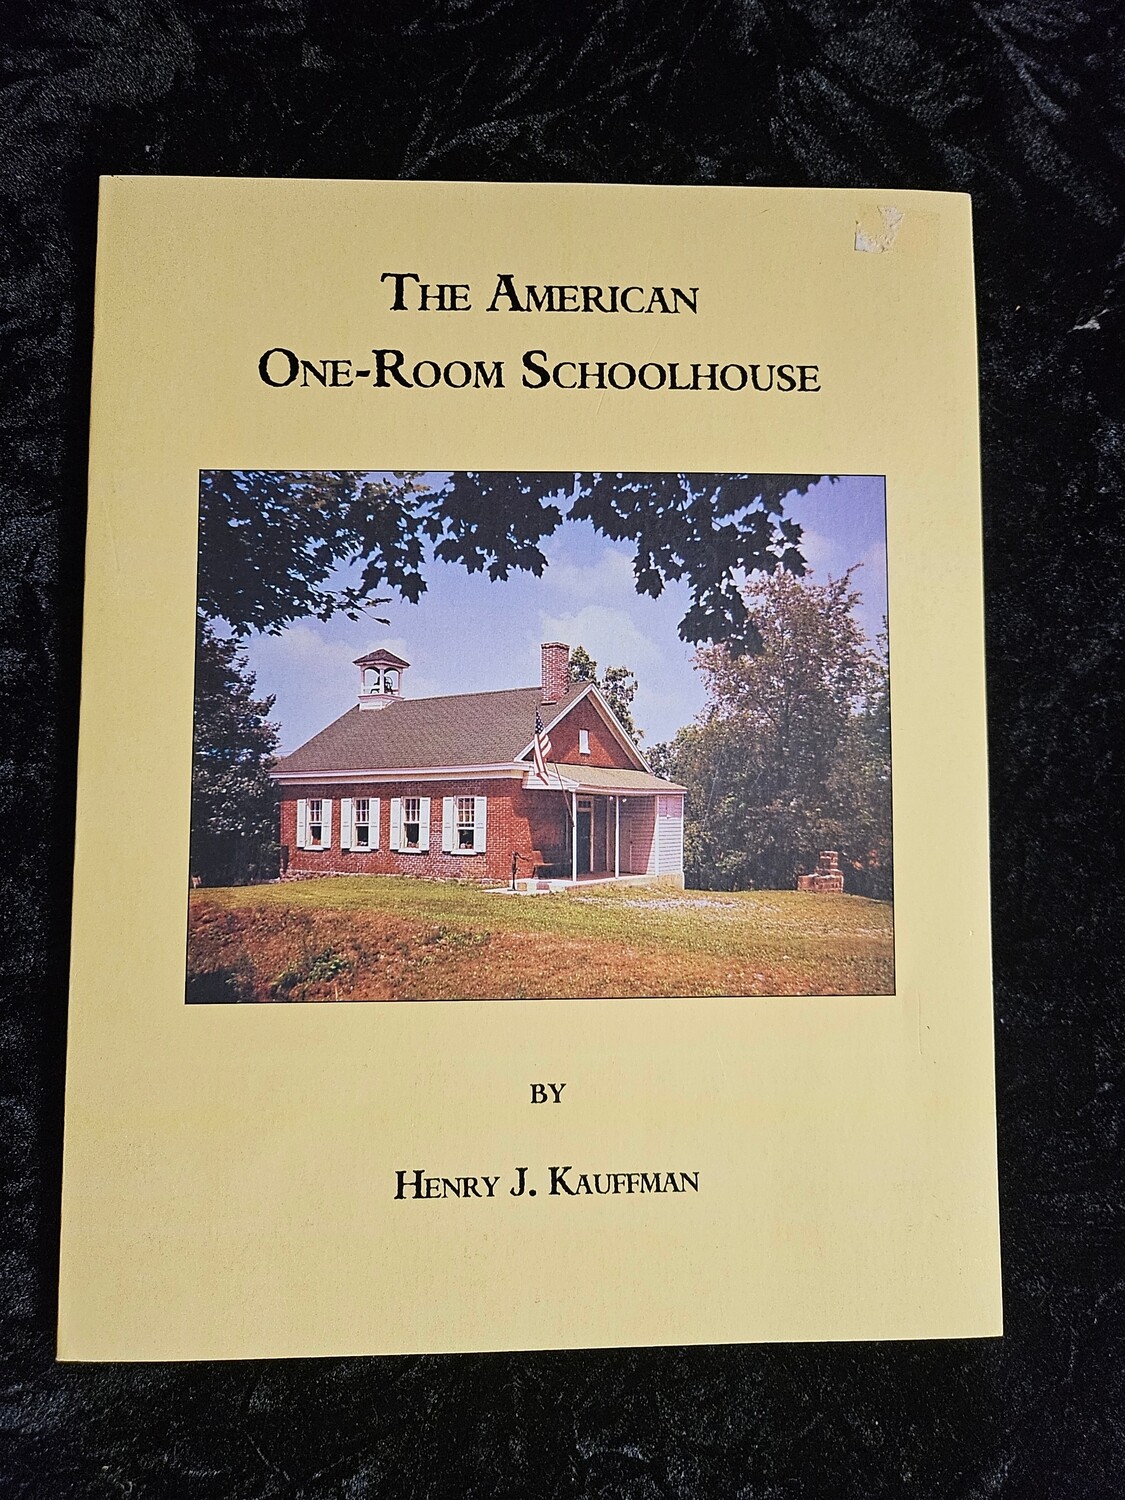 The American One-Room Schoolhouse